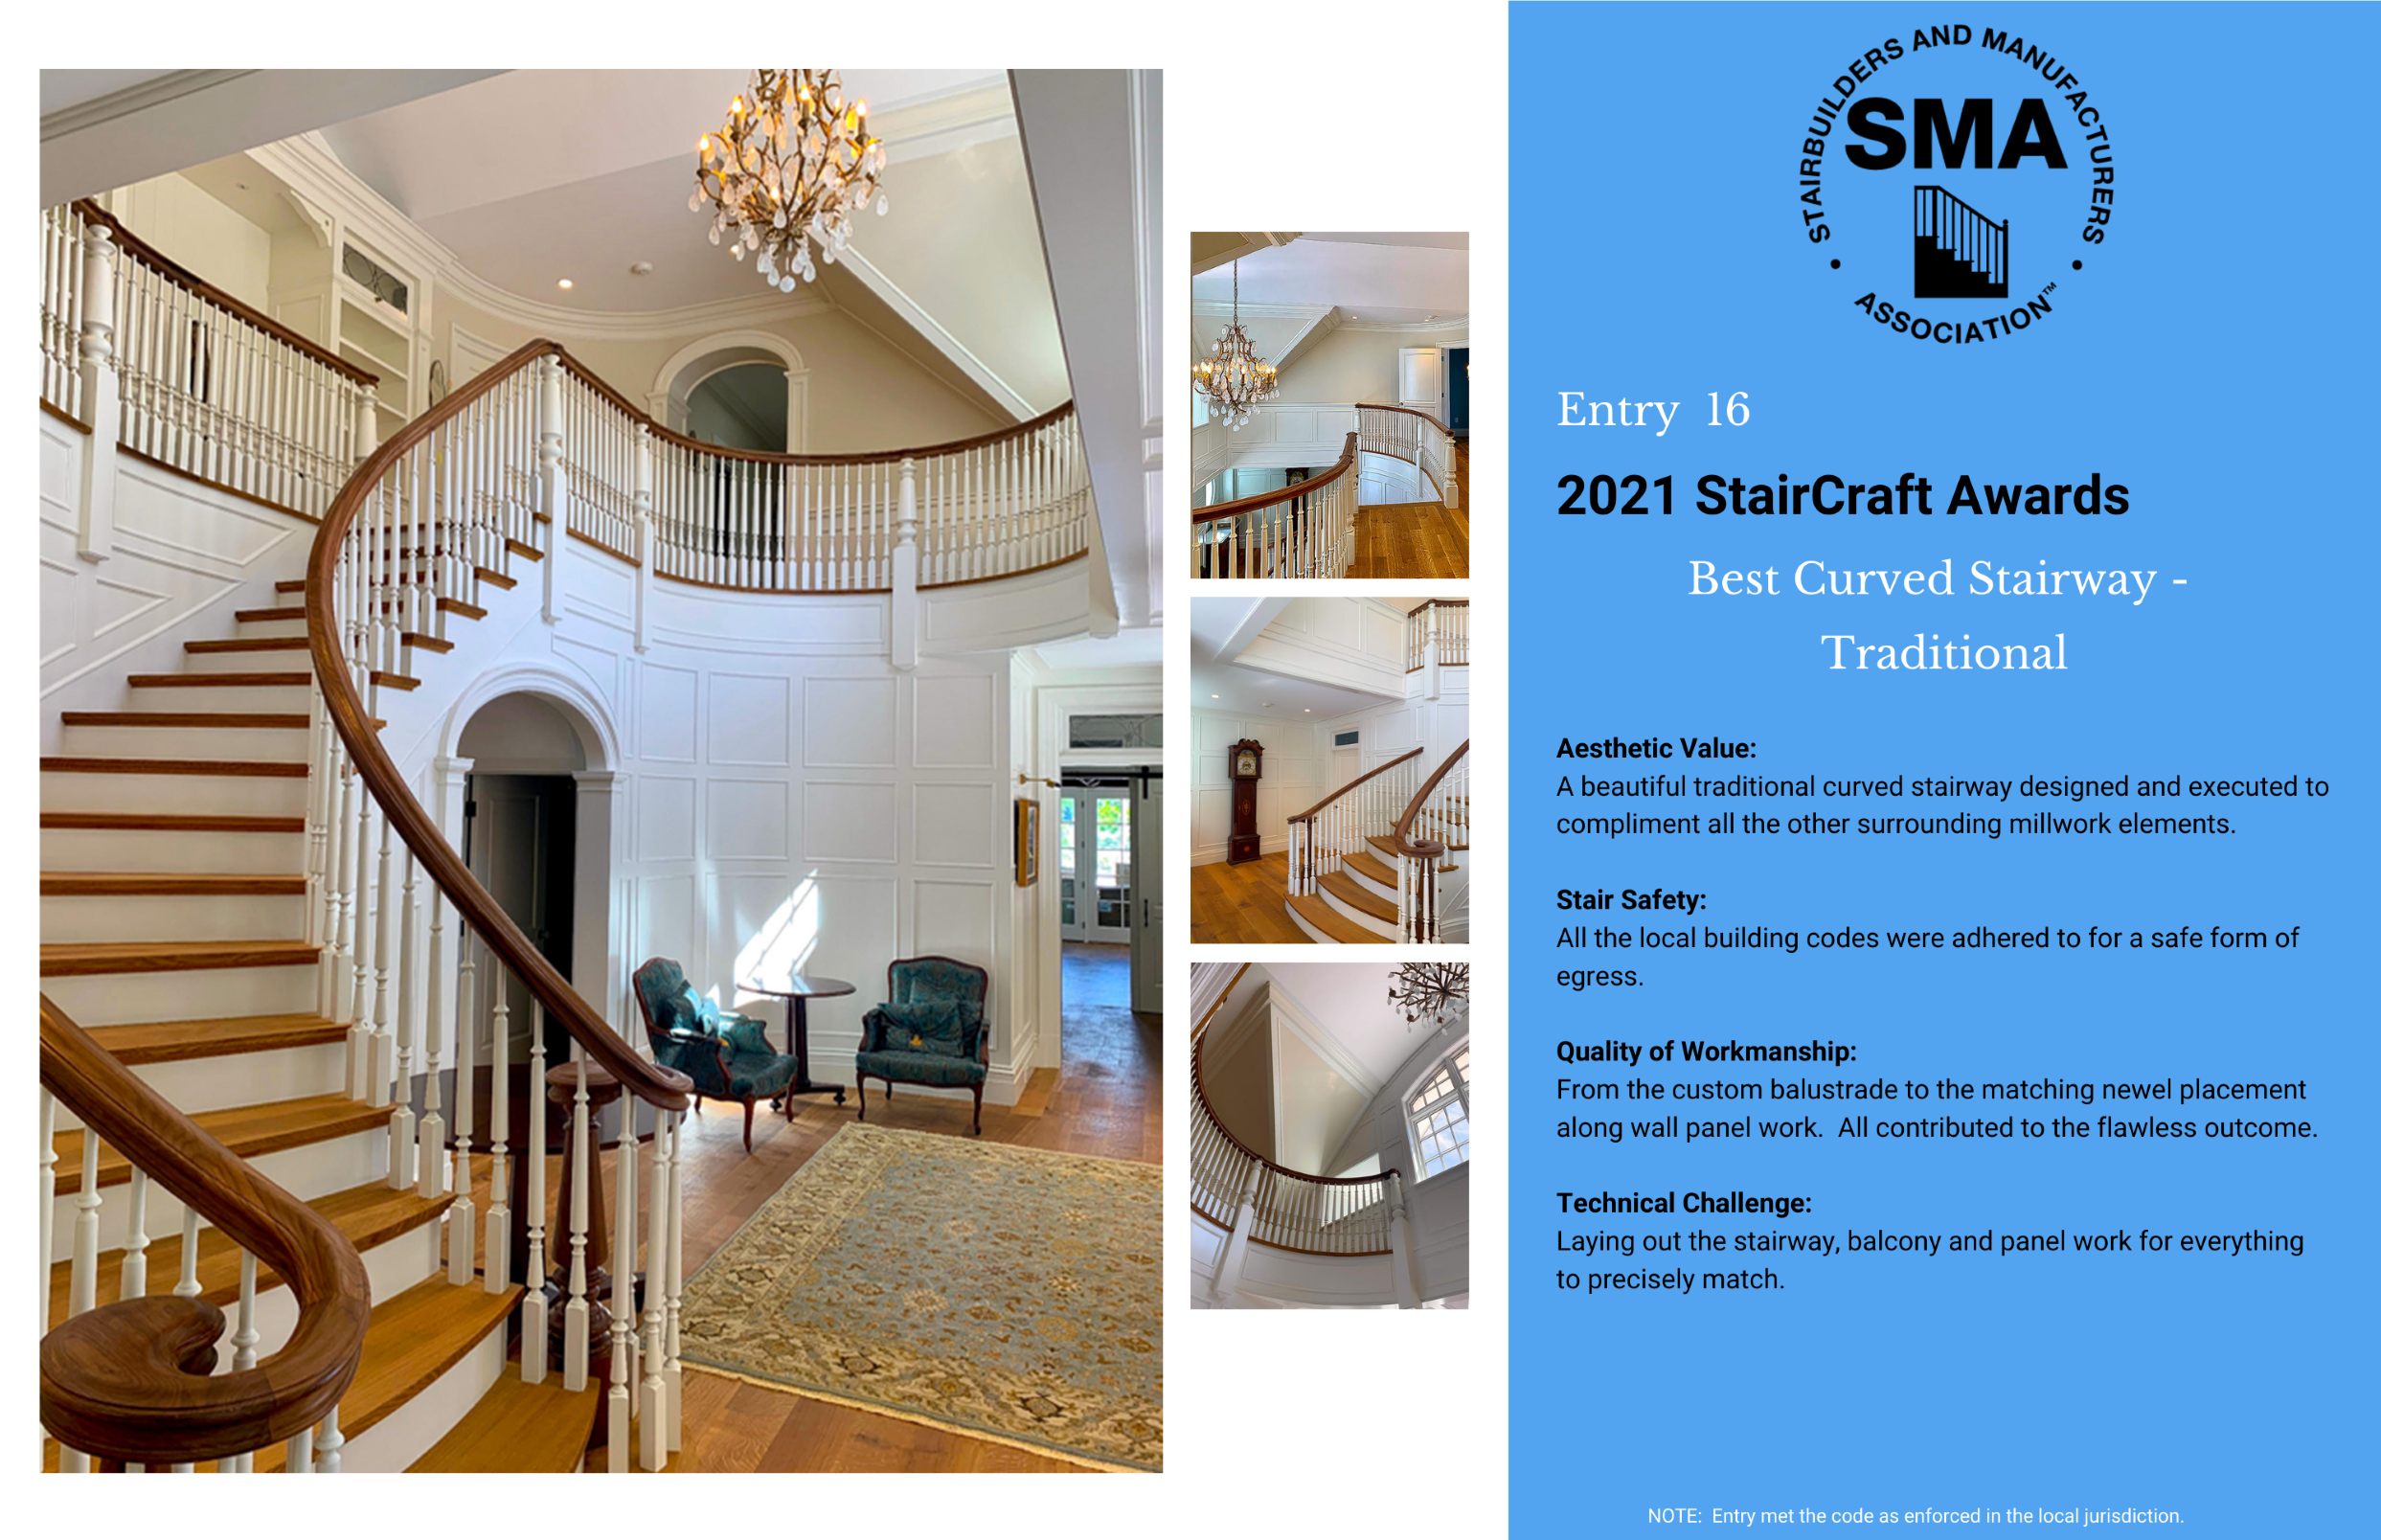 2021 StairCraft Awards Entry 16